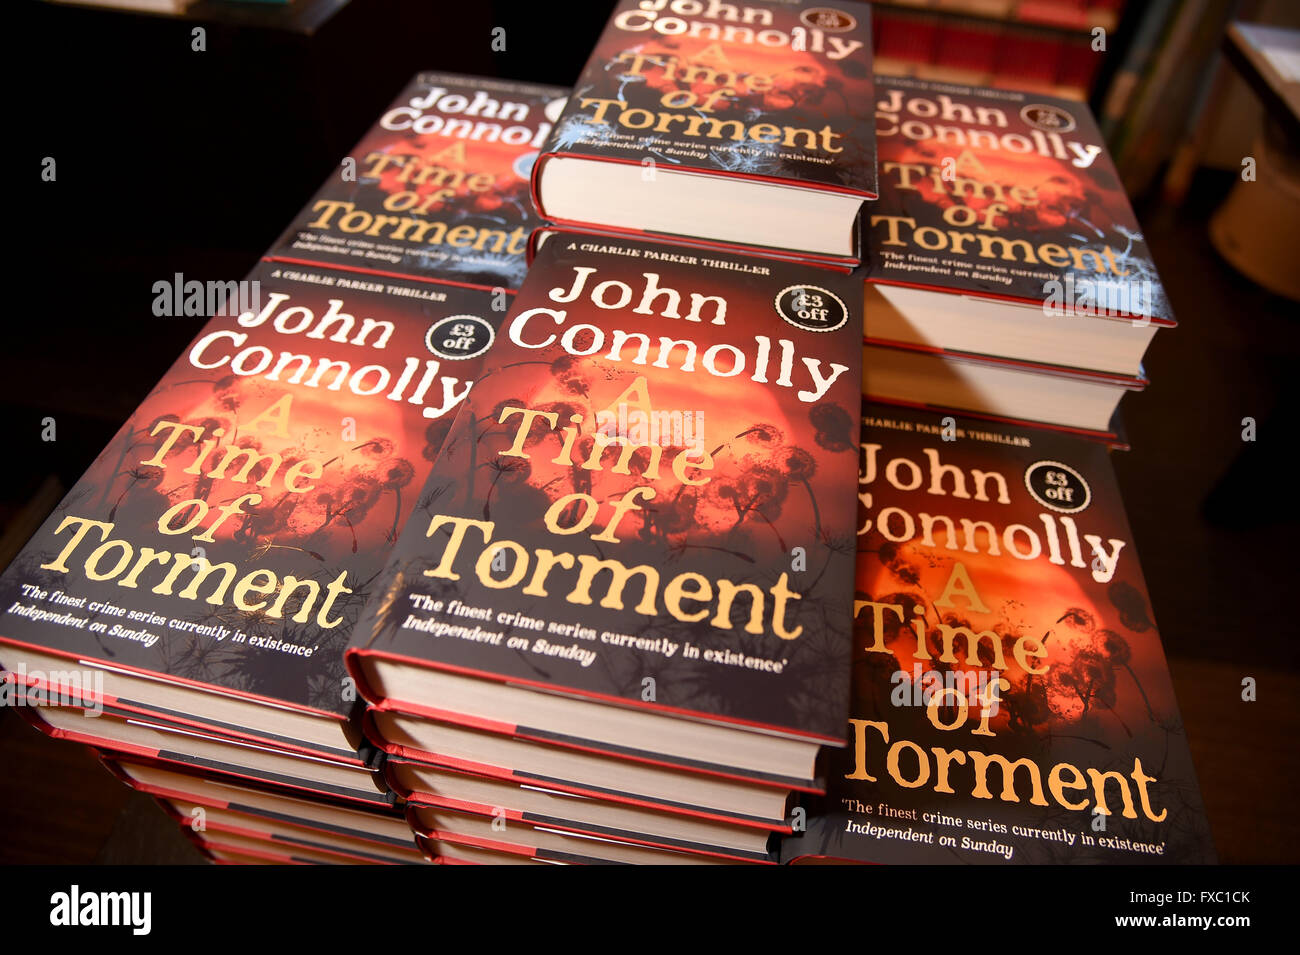 'A Time of Torment' book by John Connolly Stock Photo